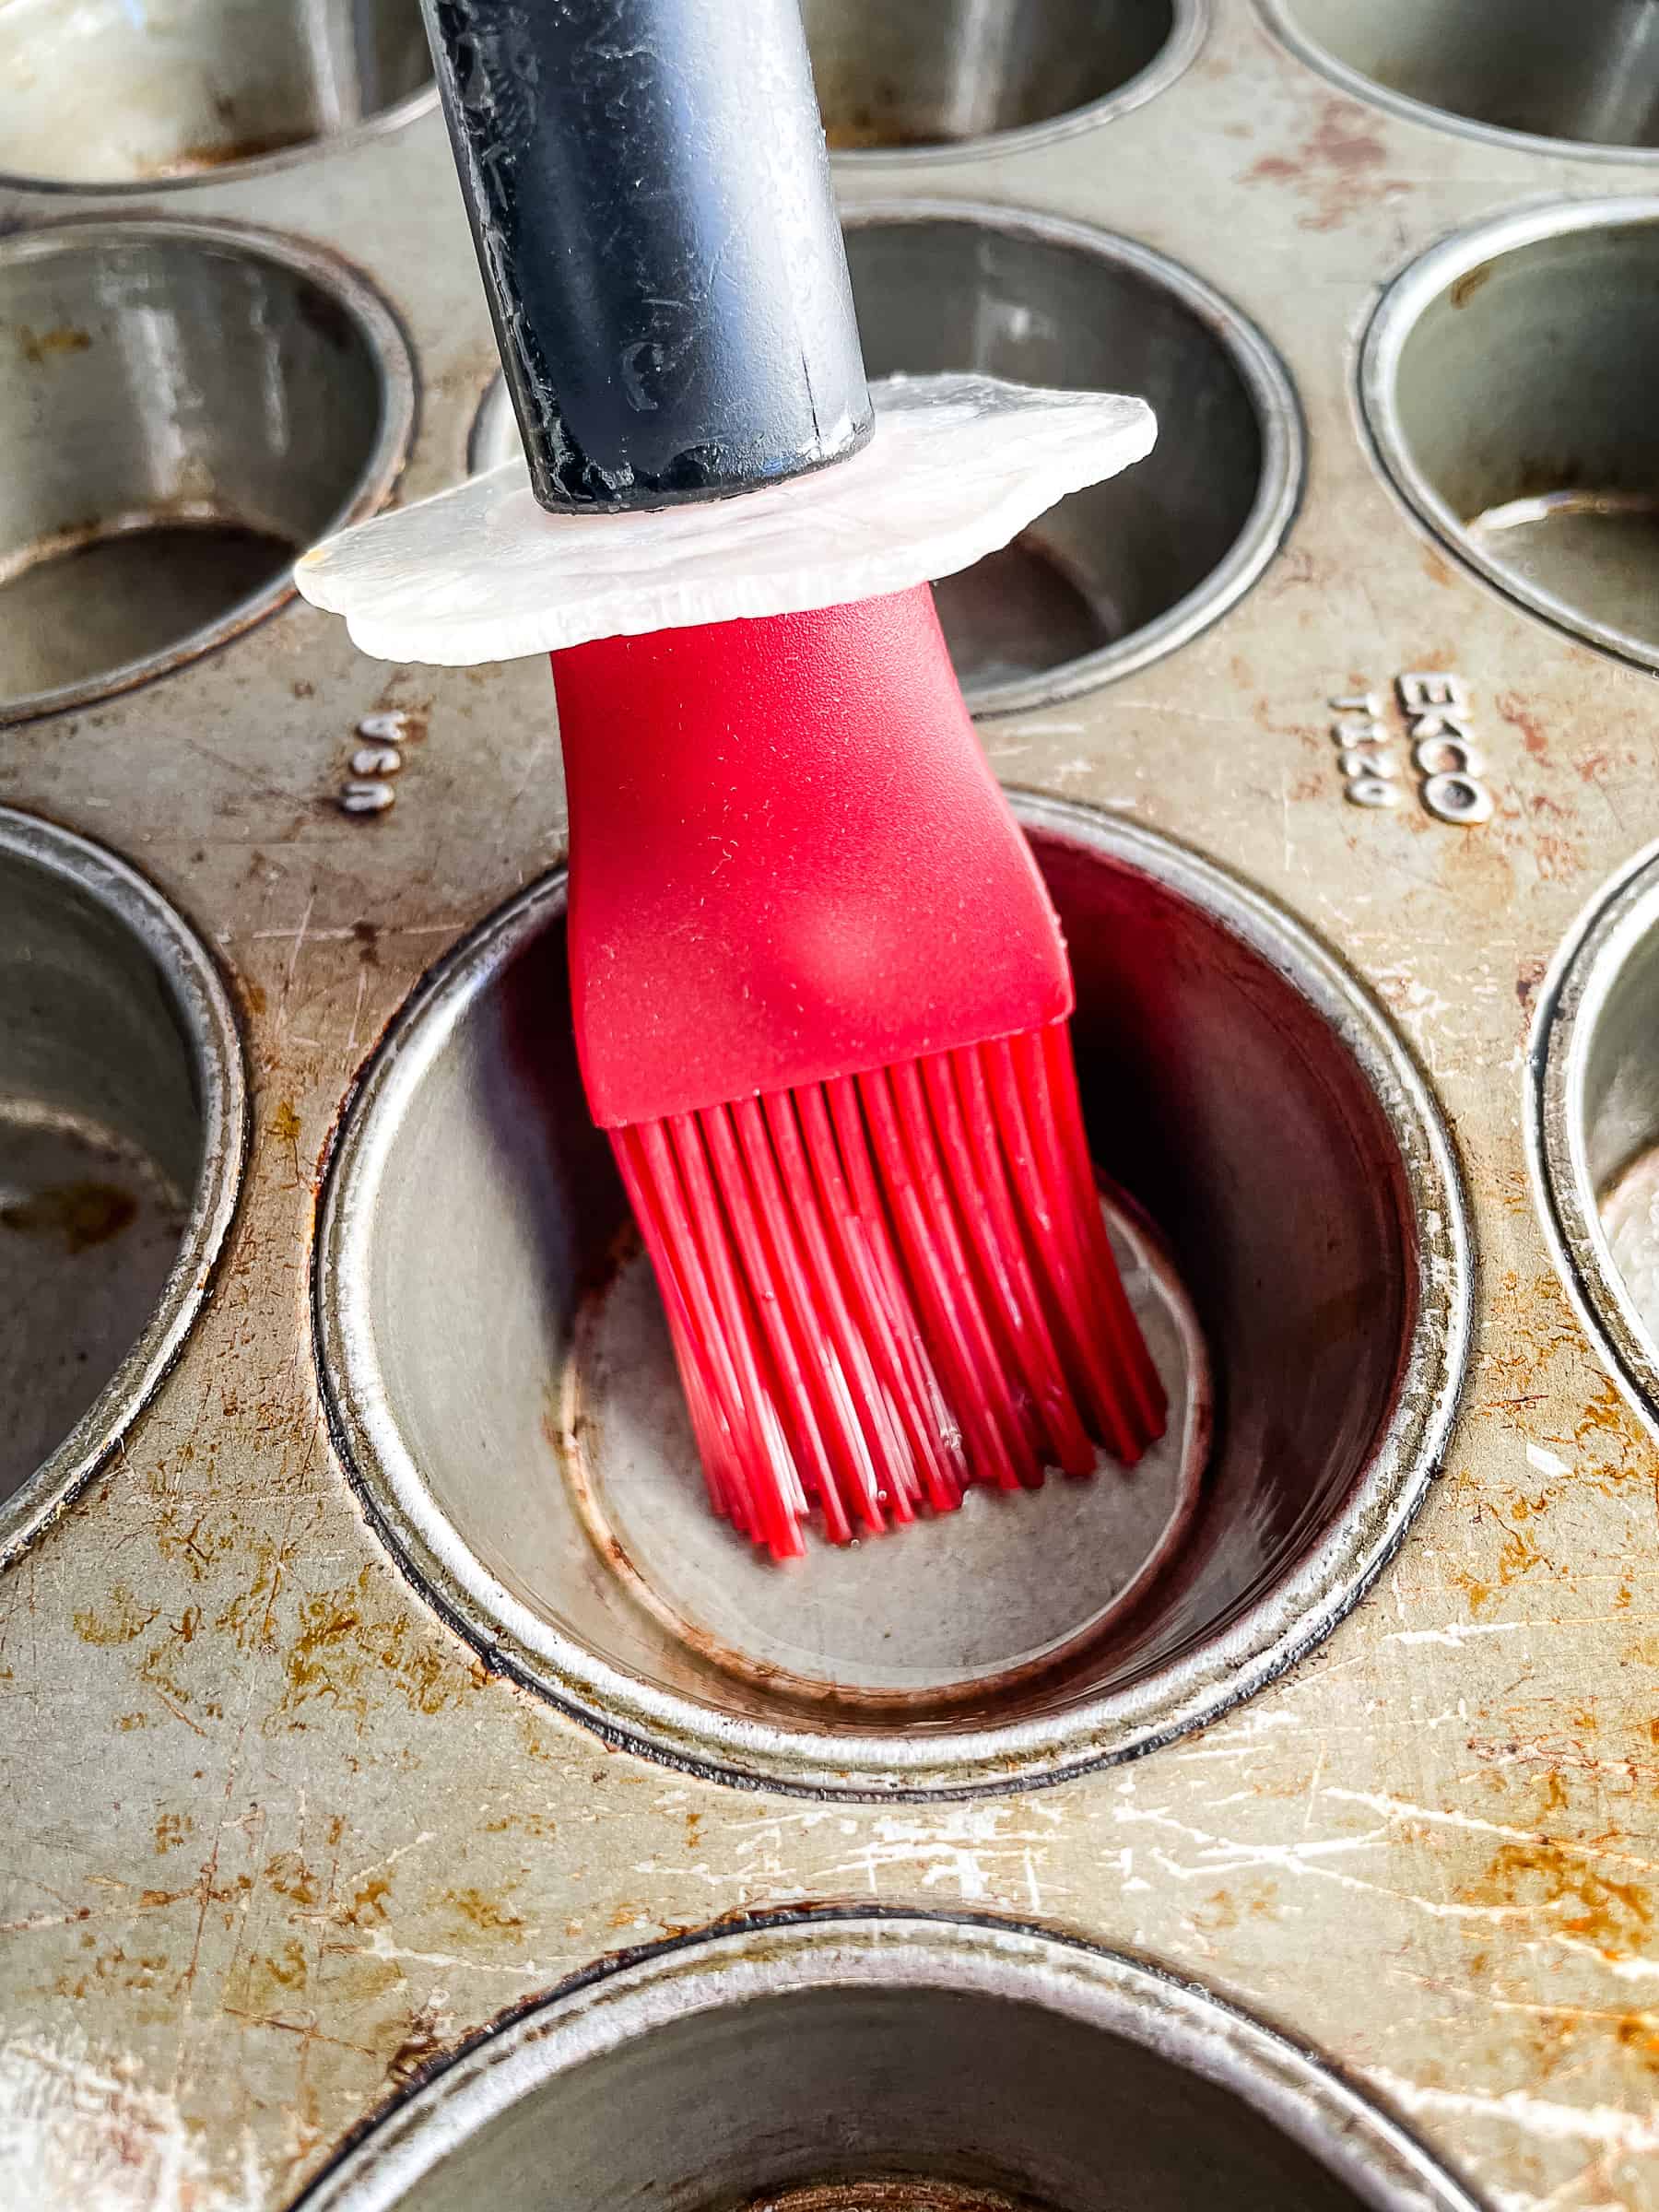 Greasing a nonstick muffin pan with a red silicone spatula. Muffin pan is old.